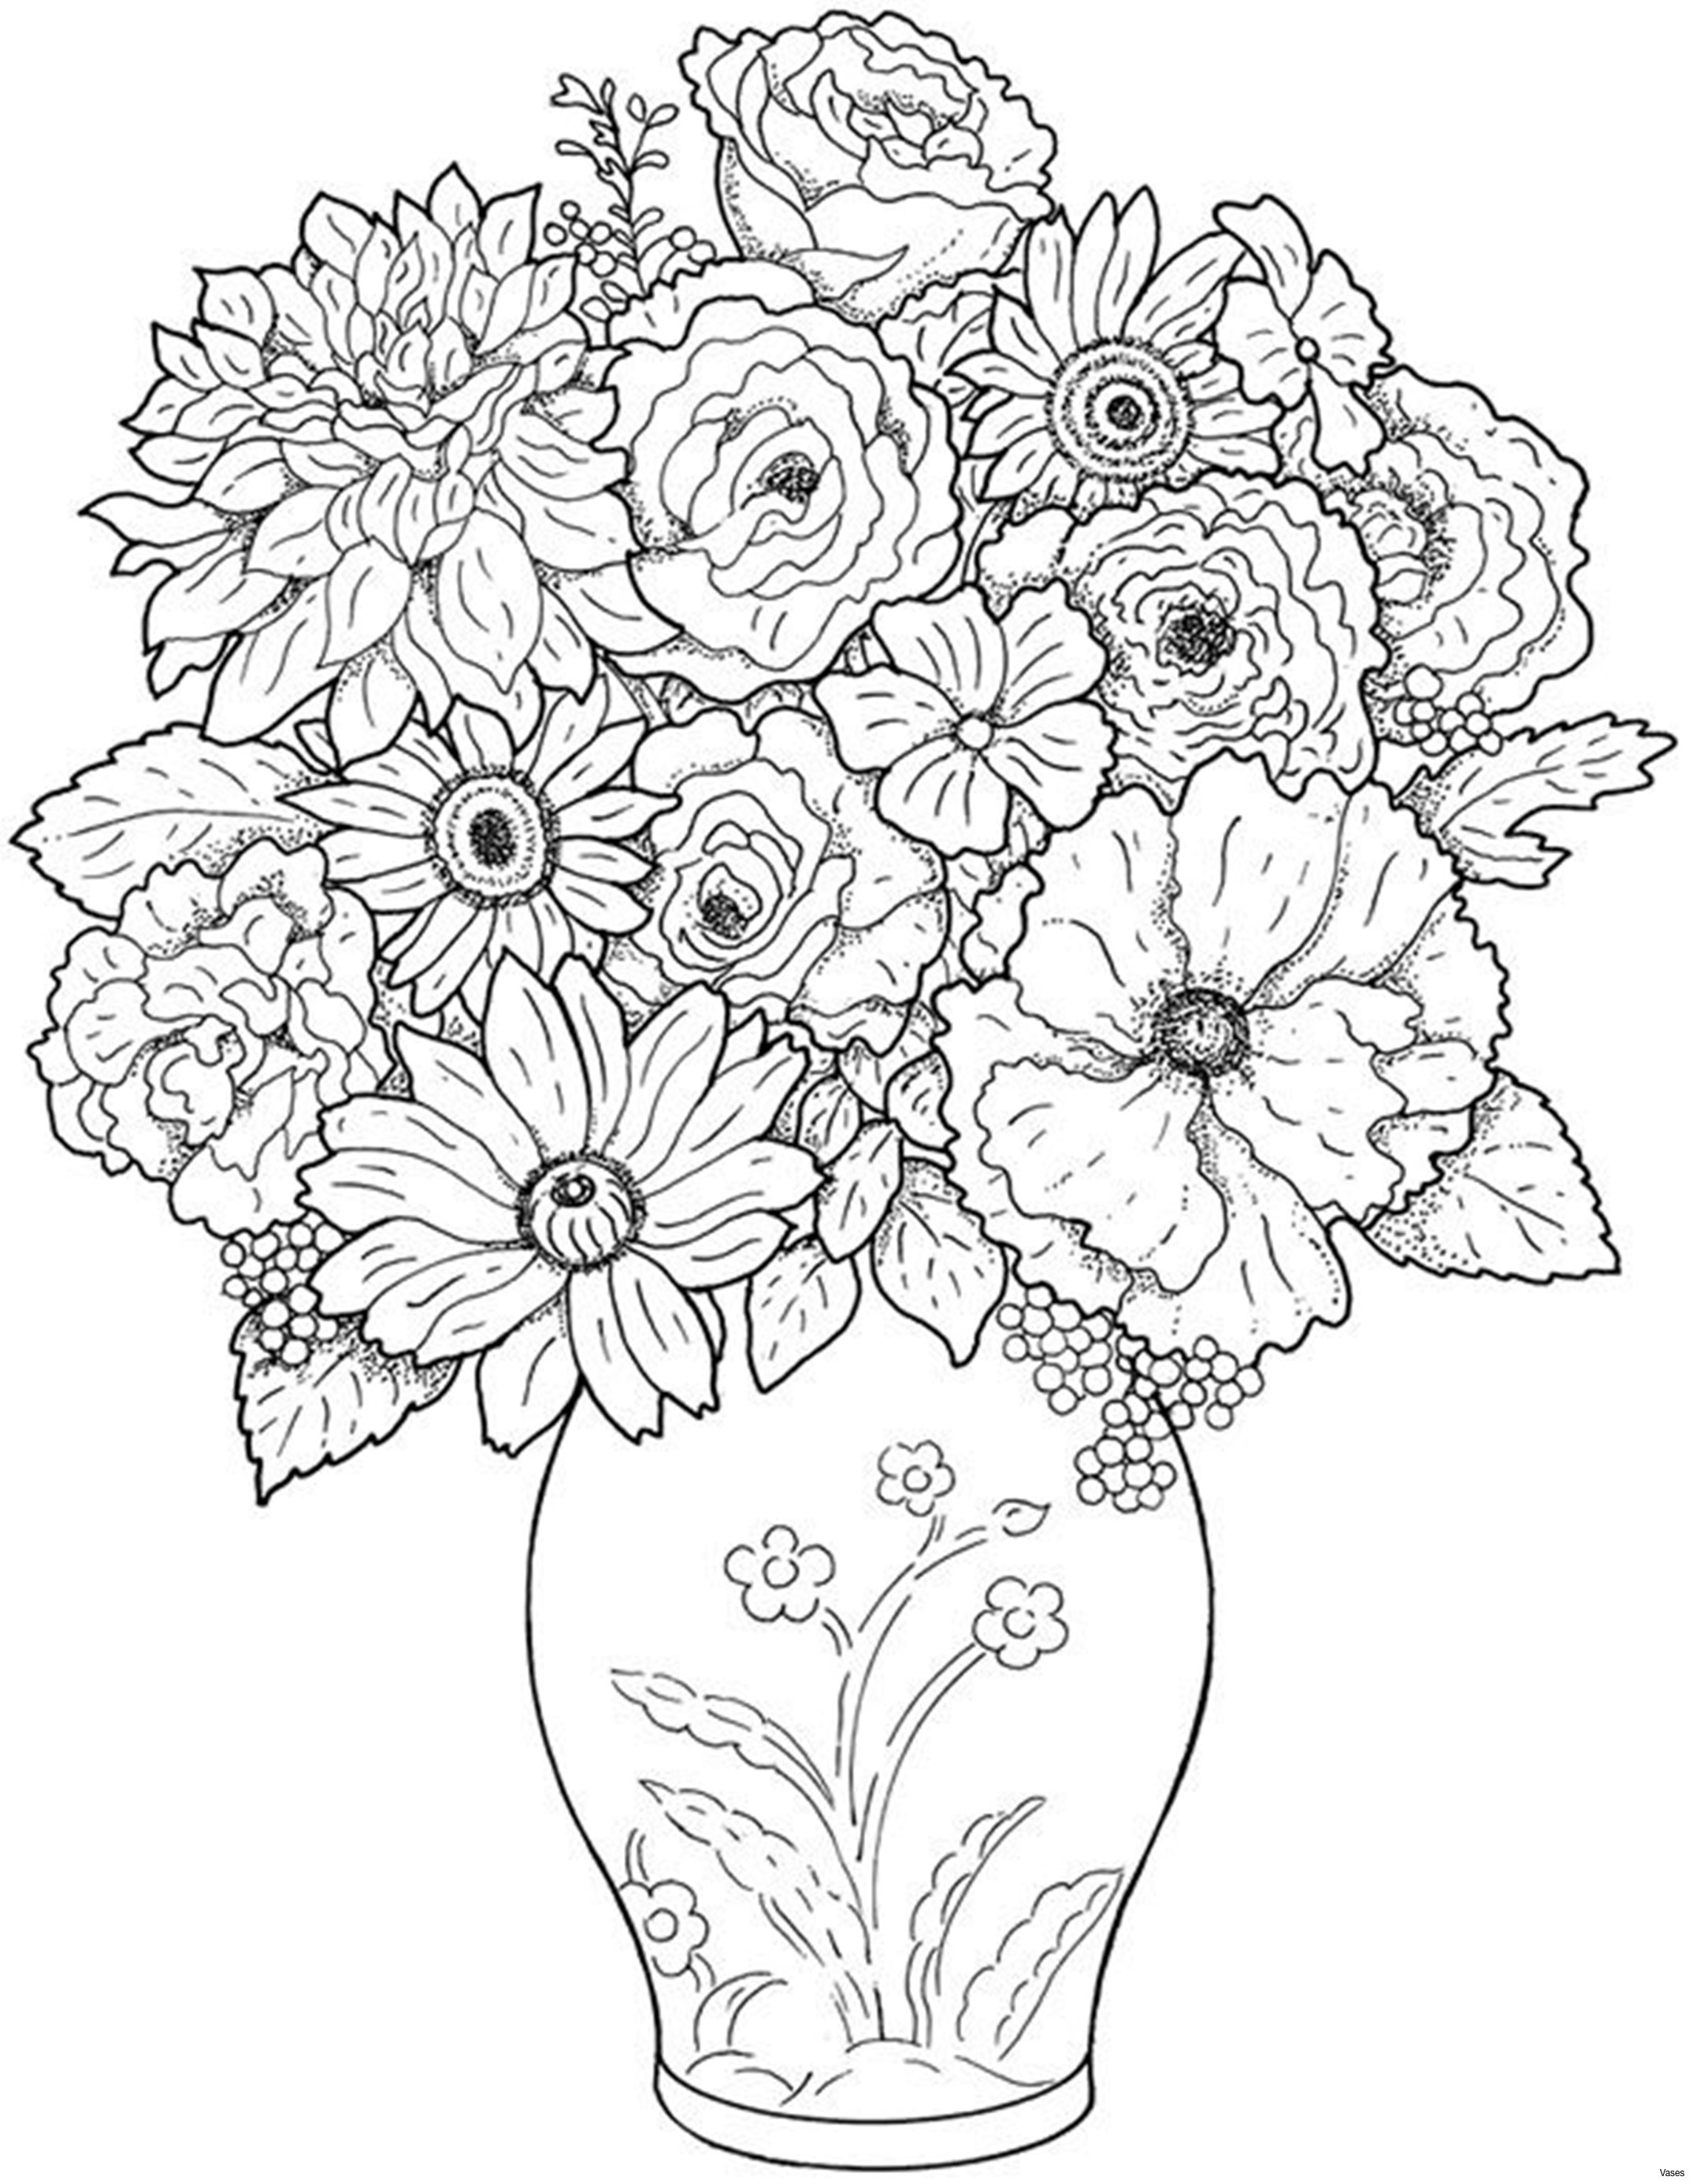 15 attractive Big Vase Floral Arrangements 2024 free download big vase floral arrangements of cool vases flower vase coloring page pages flowers in a top i 0d ruva with regard to cool vases flower vase coloring page pages flowers in a top i 0d